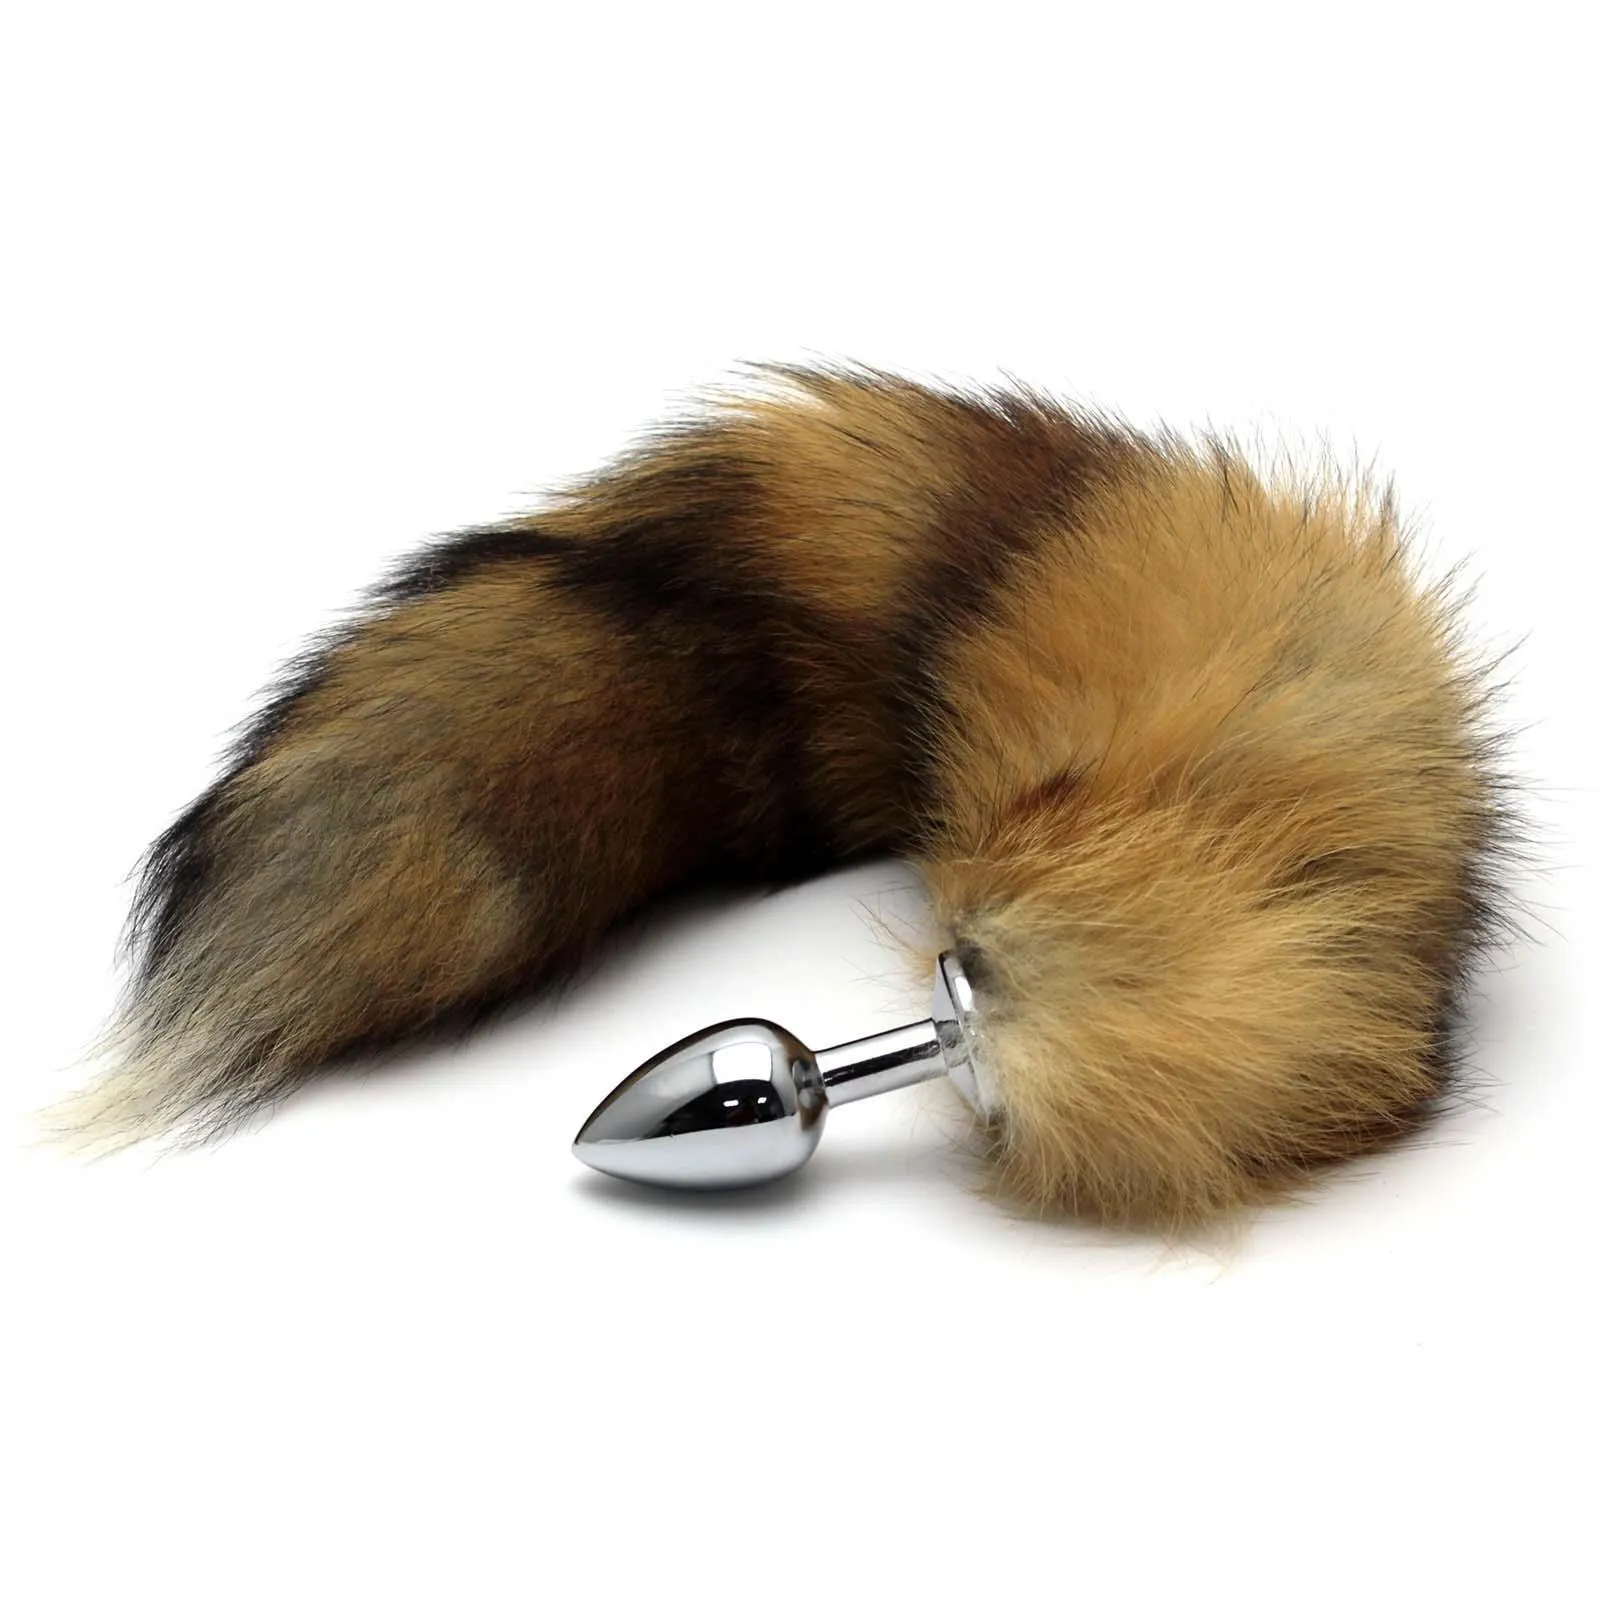 Anal Toys Metal Anal Toy Butt Plug Fox Tail Insert Stopper Adult Sex  Product #R21 From Akgxt, $7.78